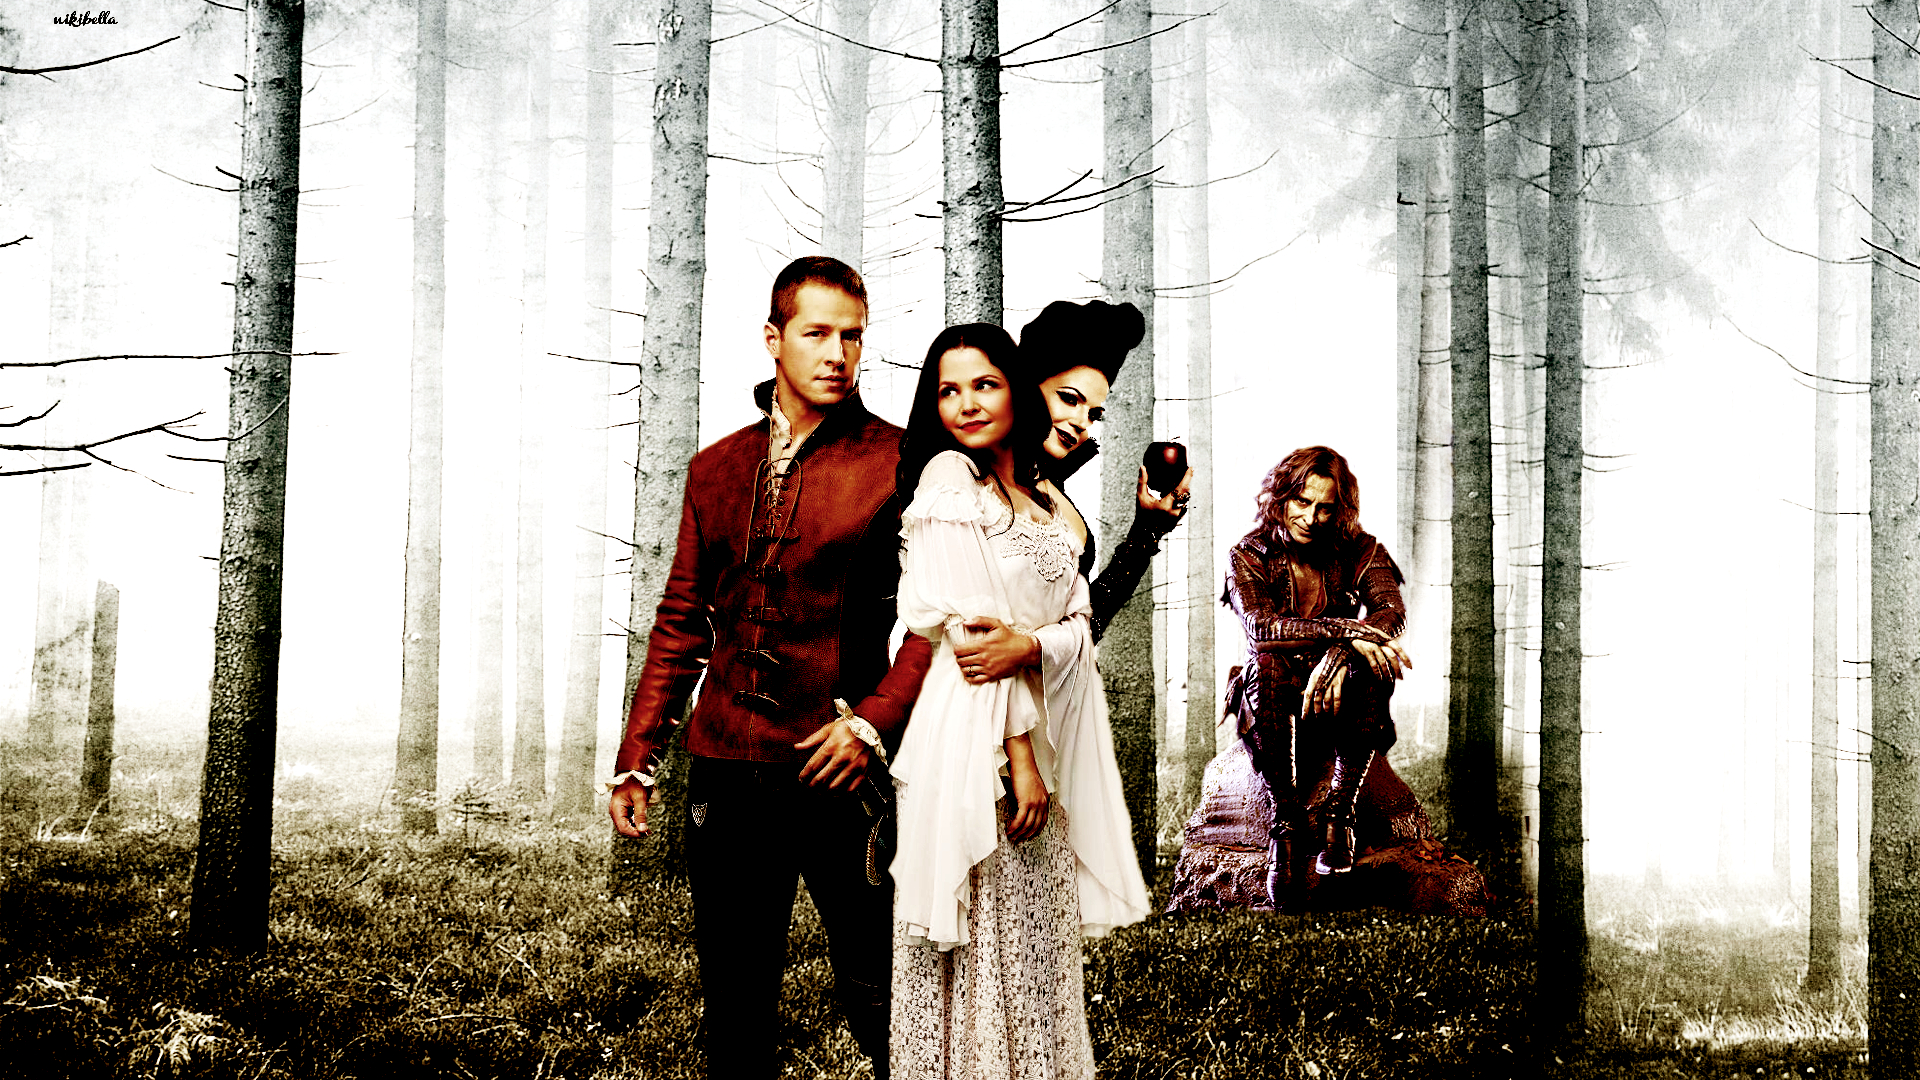 1920x1080 once upon a time wallpaper Once Upon A Time Wallpaper (32432709) Fanpop